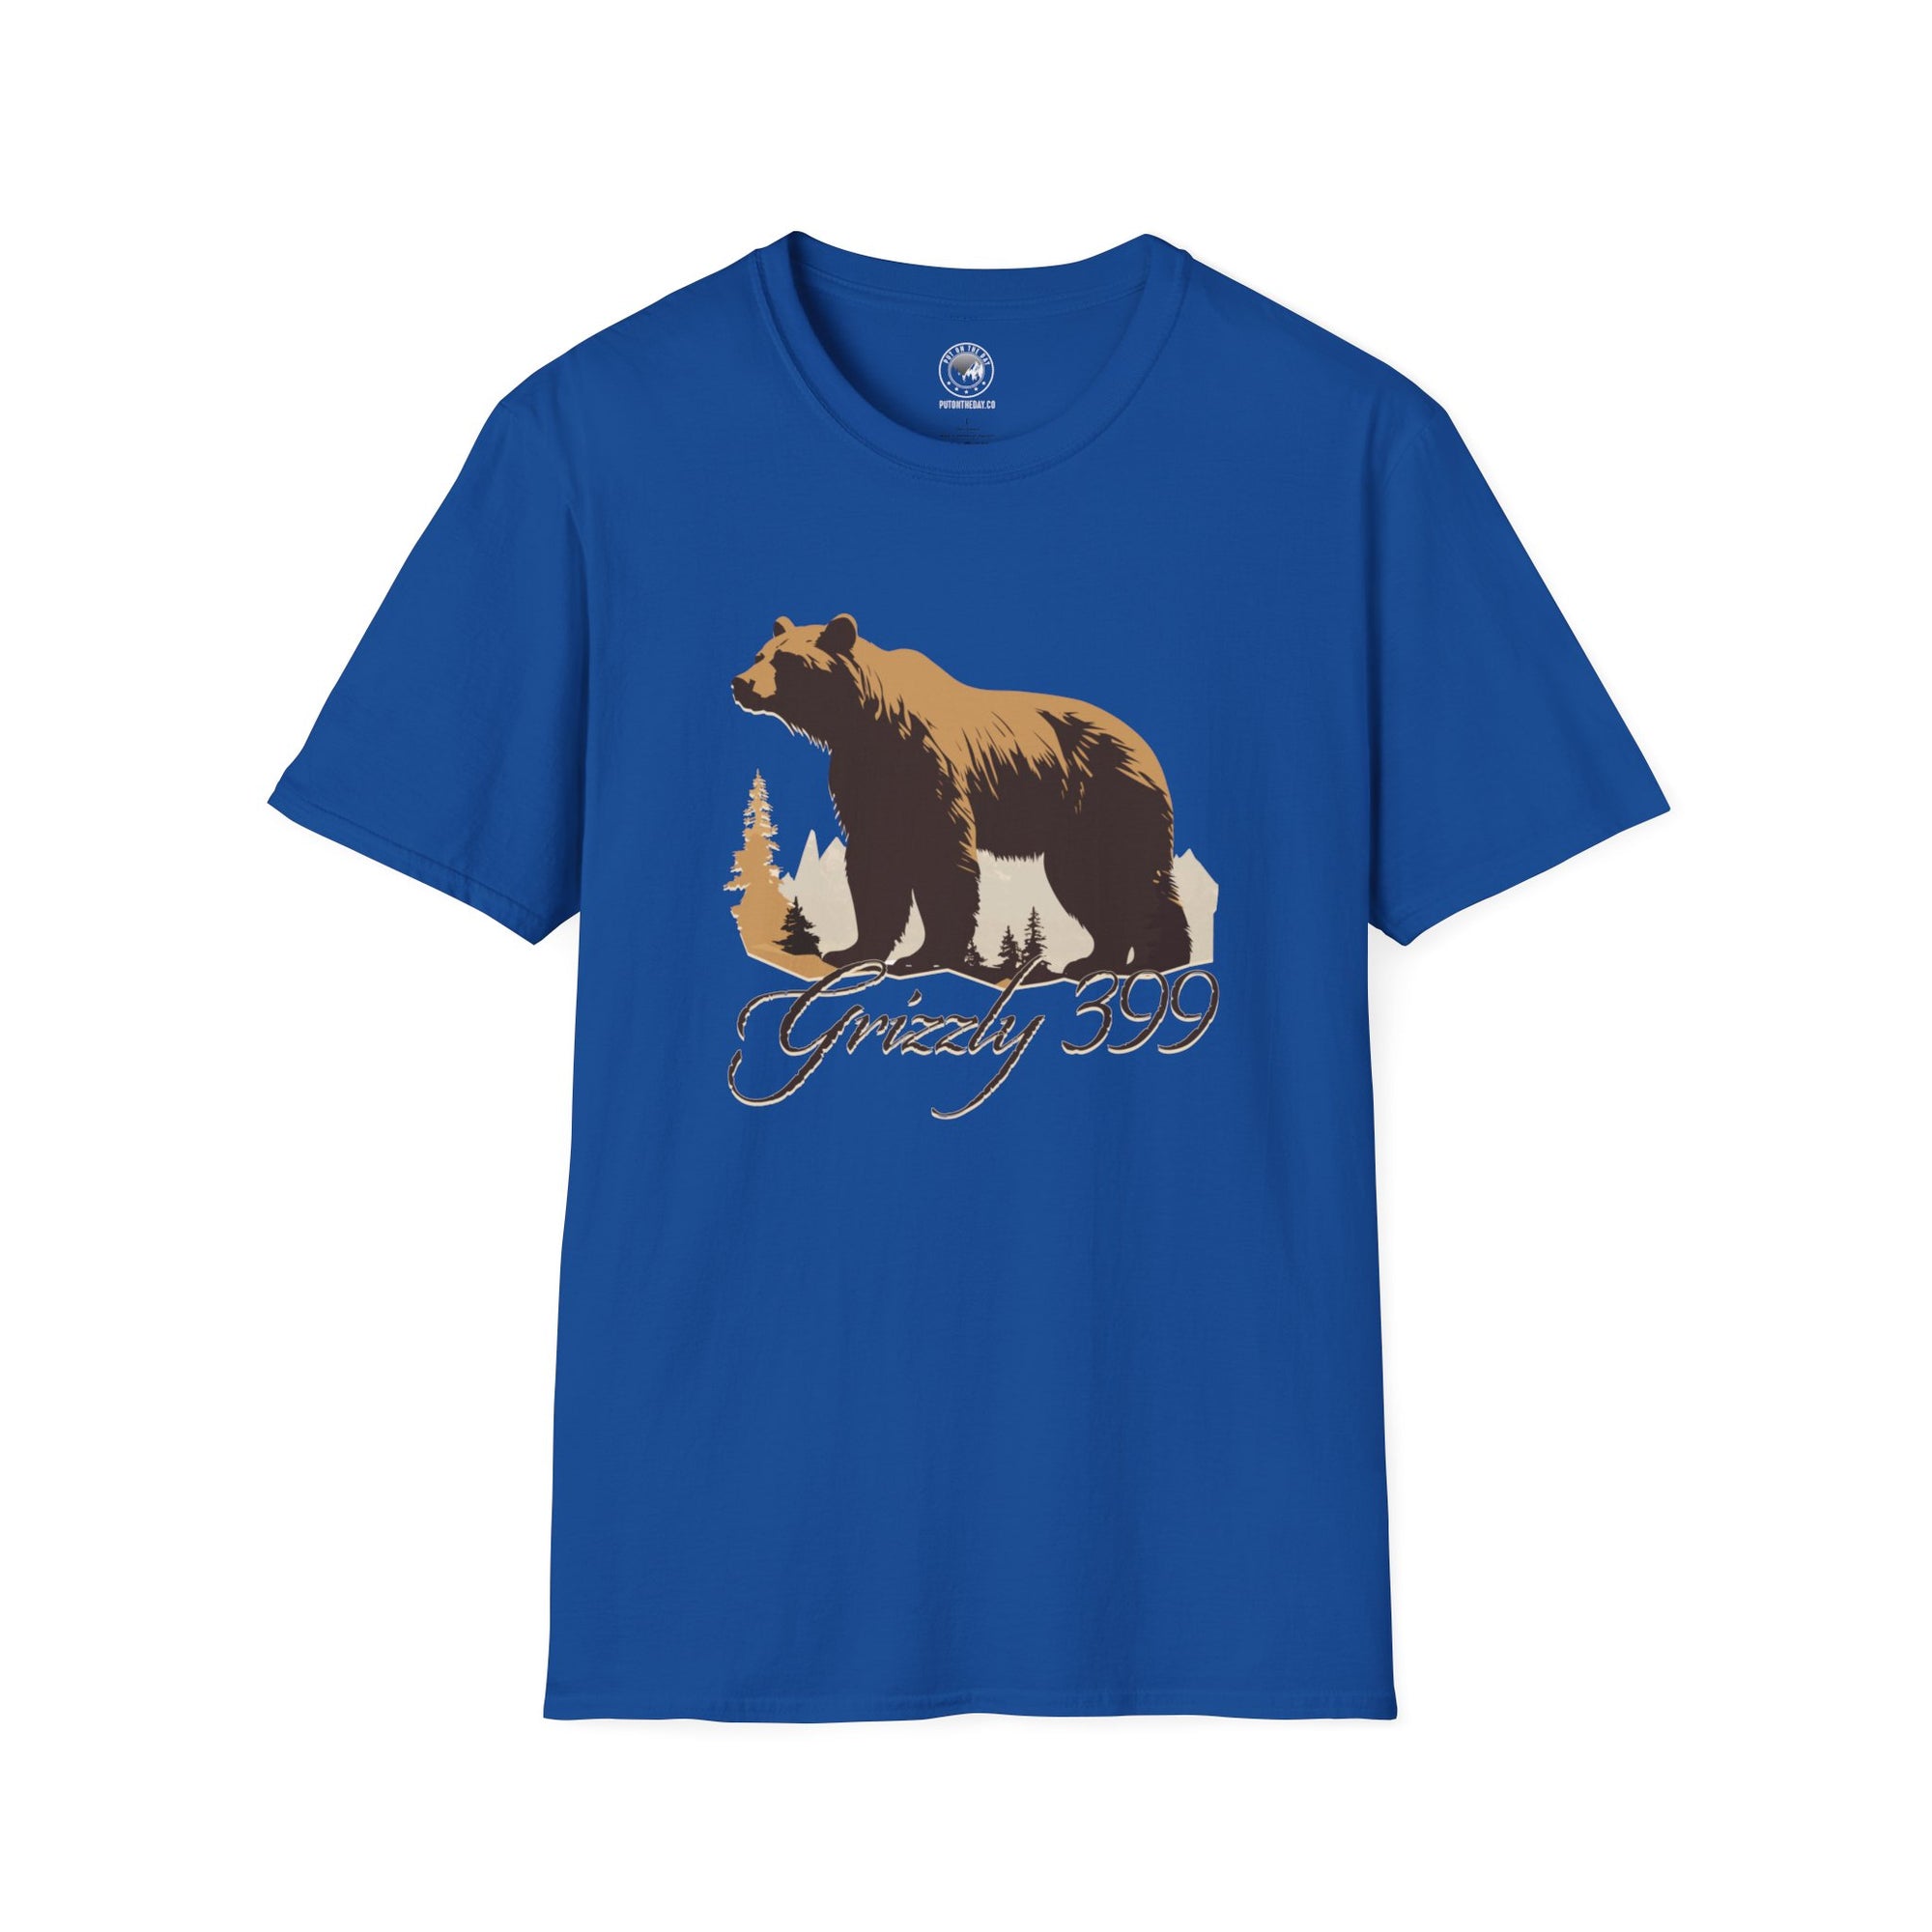 Grizzly 399 Mountain T-Shirt